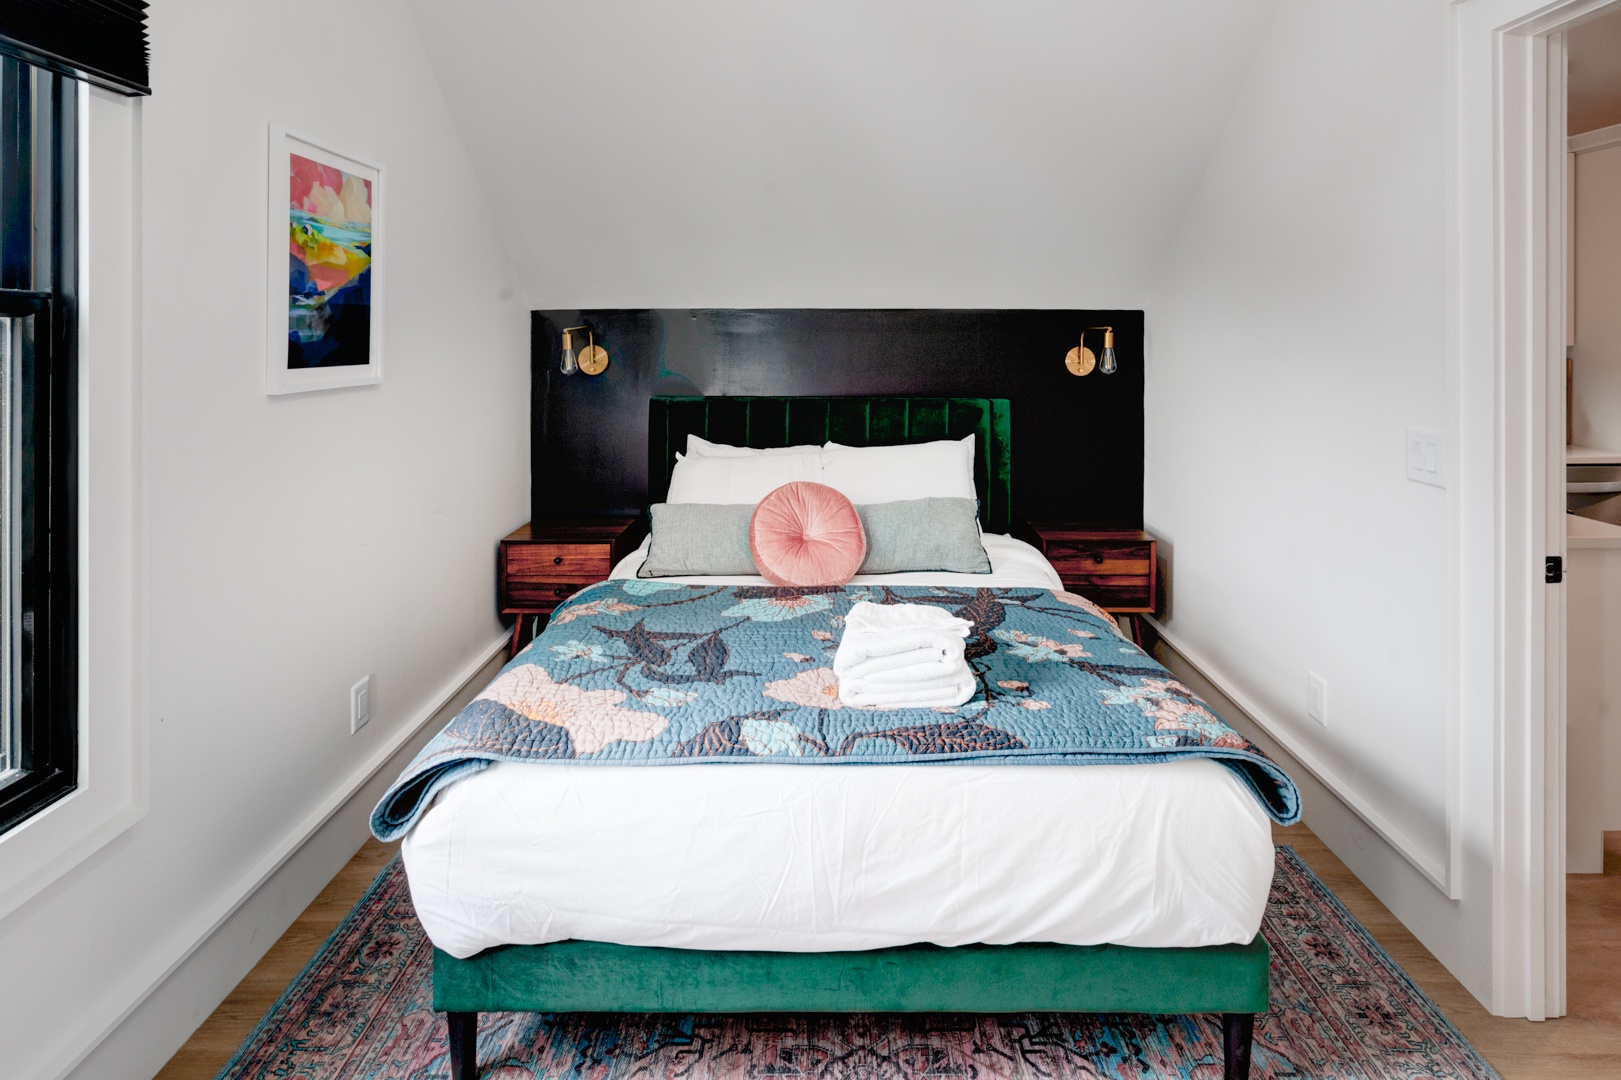 The primary bedroom offers a regal queen-sized bed & desk workspace